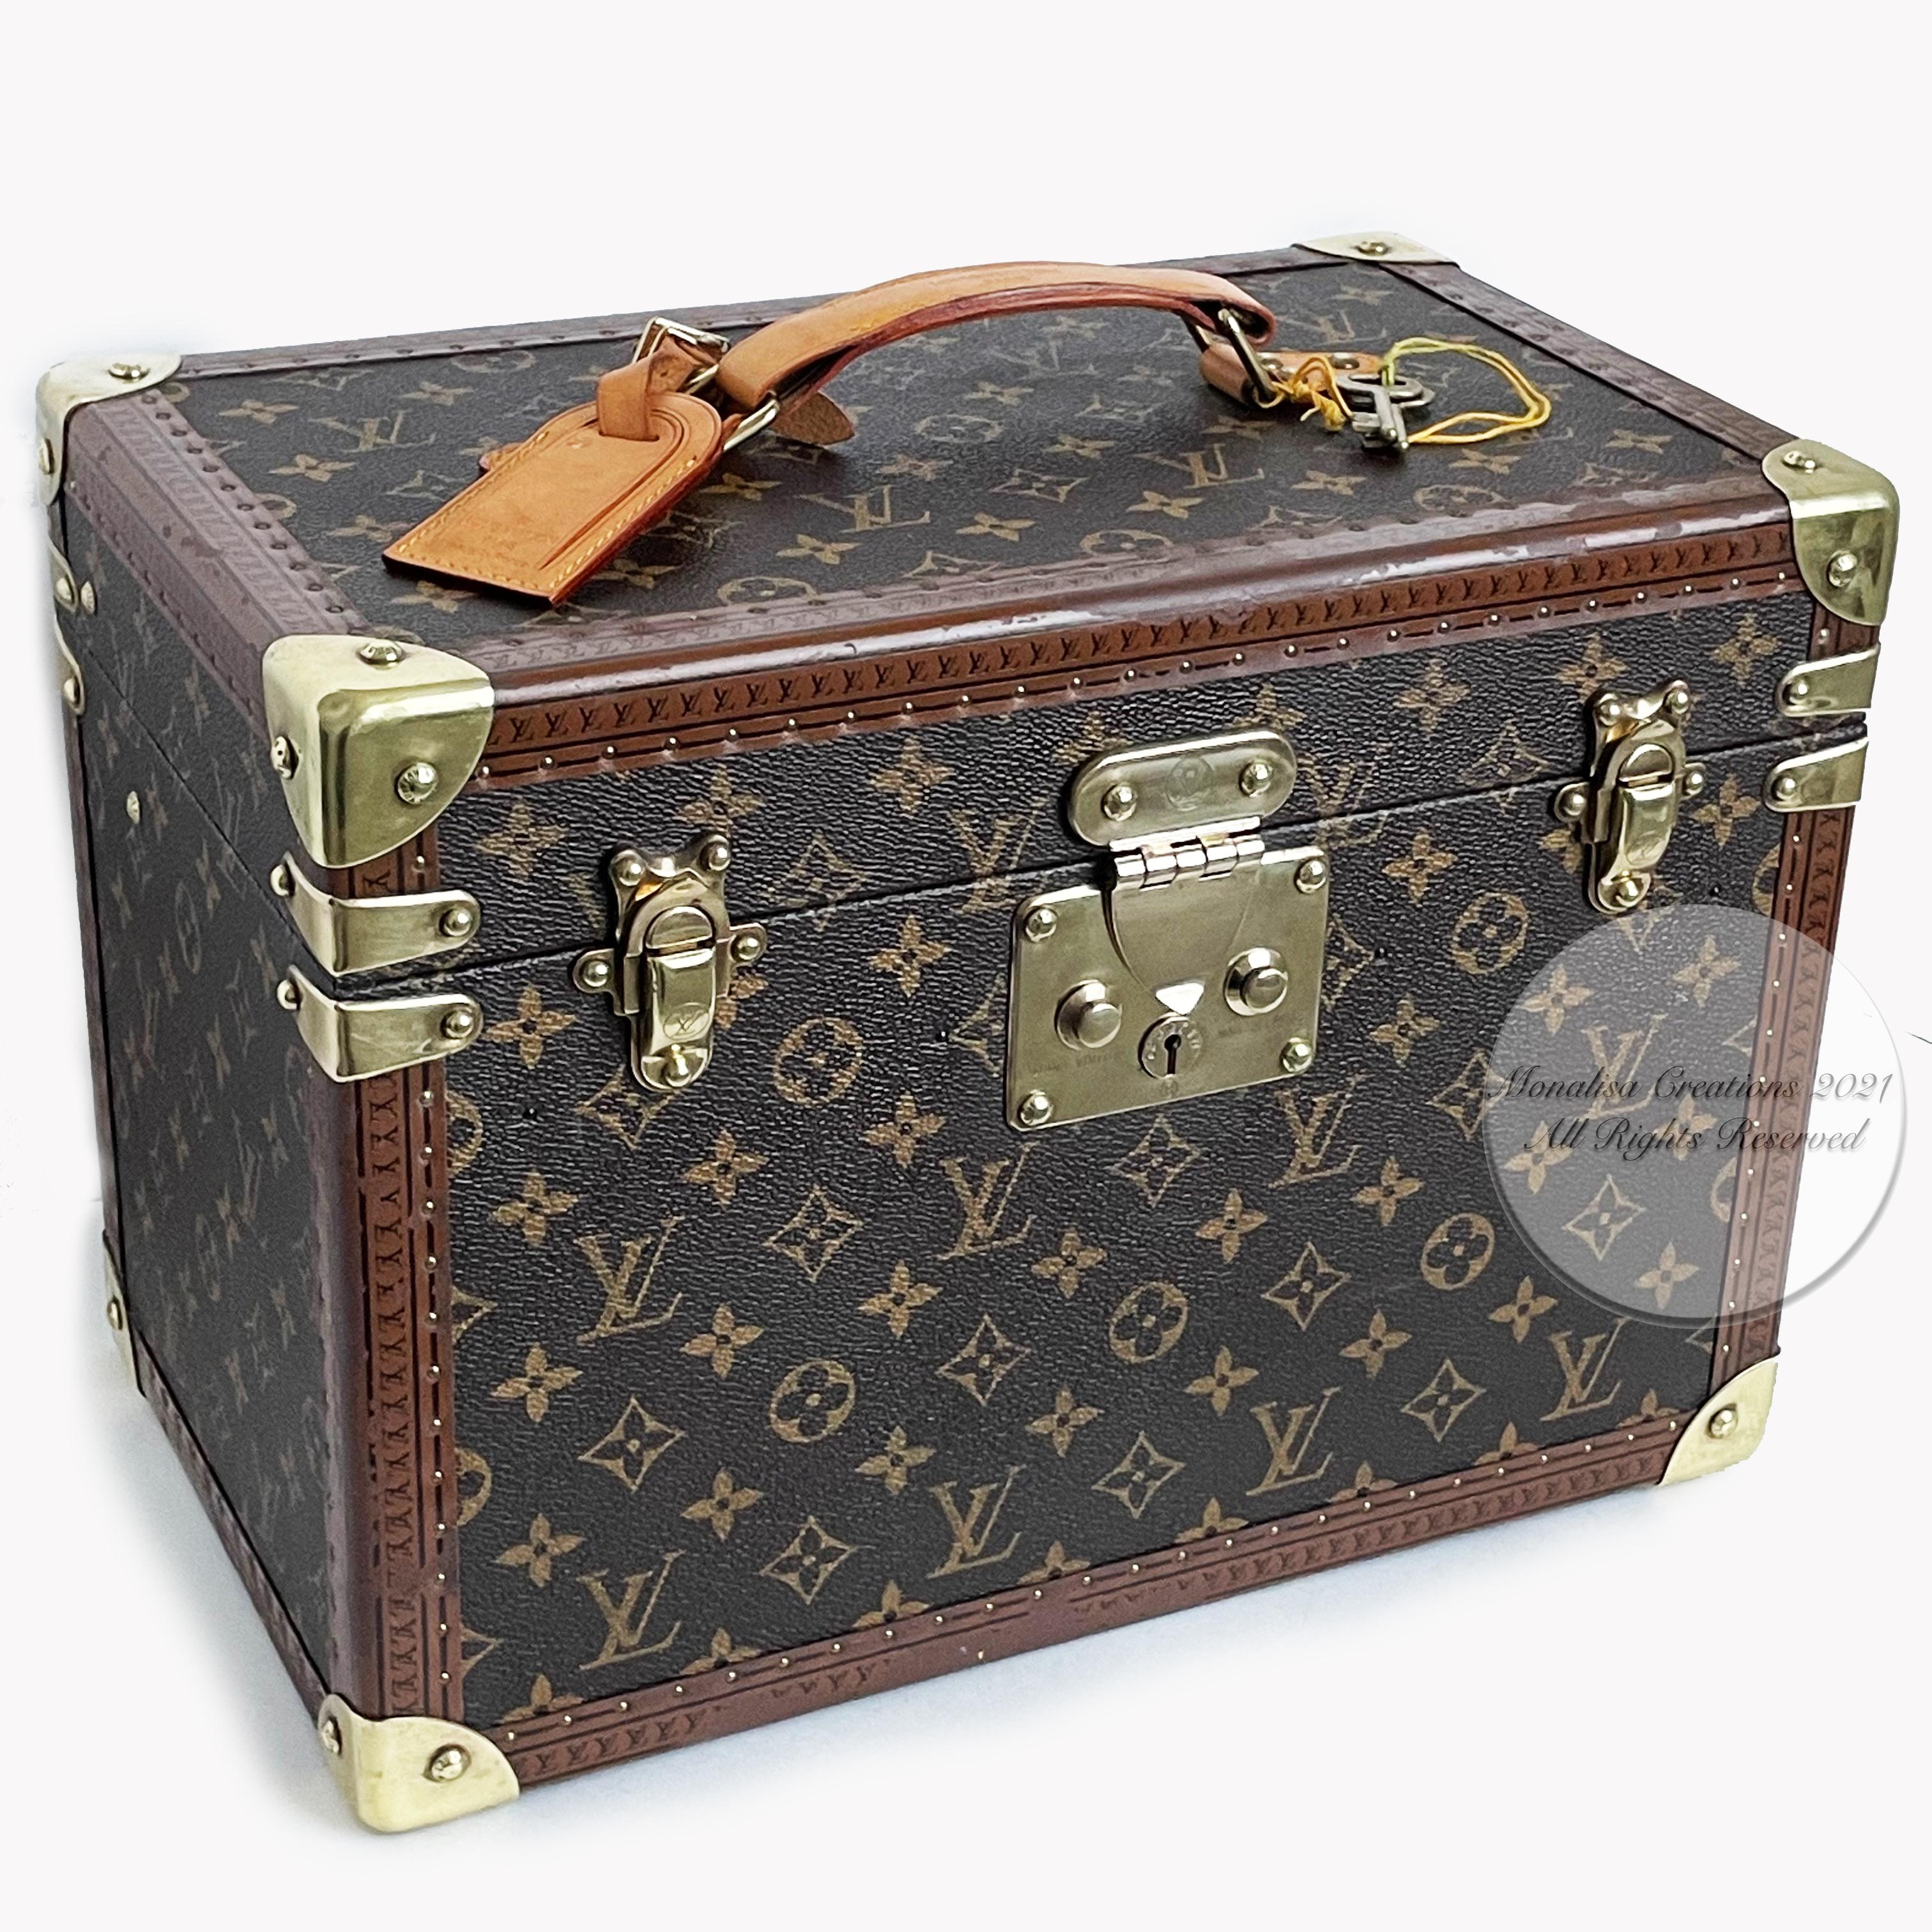 Authentic, preowned, vintage Louis Vuitton Train Case Boite Pharmacie Vanity or Beauty Case likely from the 90s. Last known retail price: $8650. Monogram canvas exterior, lined in washable canvas. Comes w/removable bottle holder, mirrored jewelry